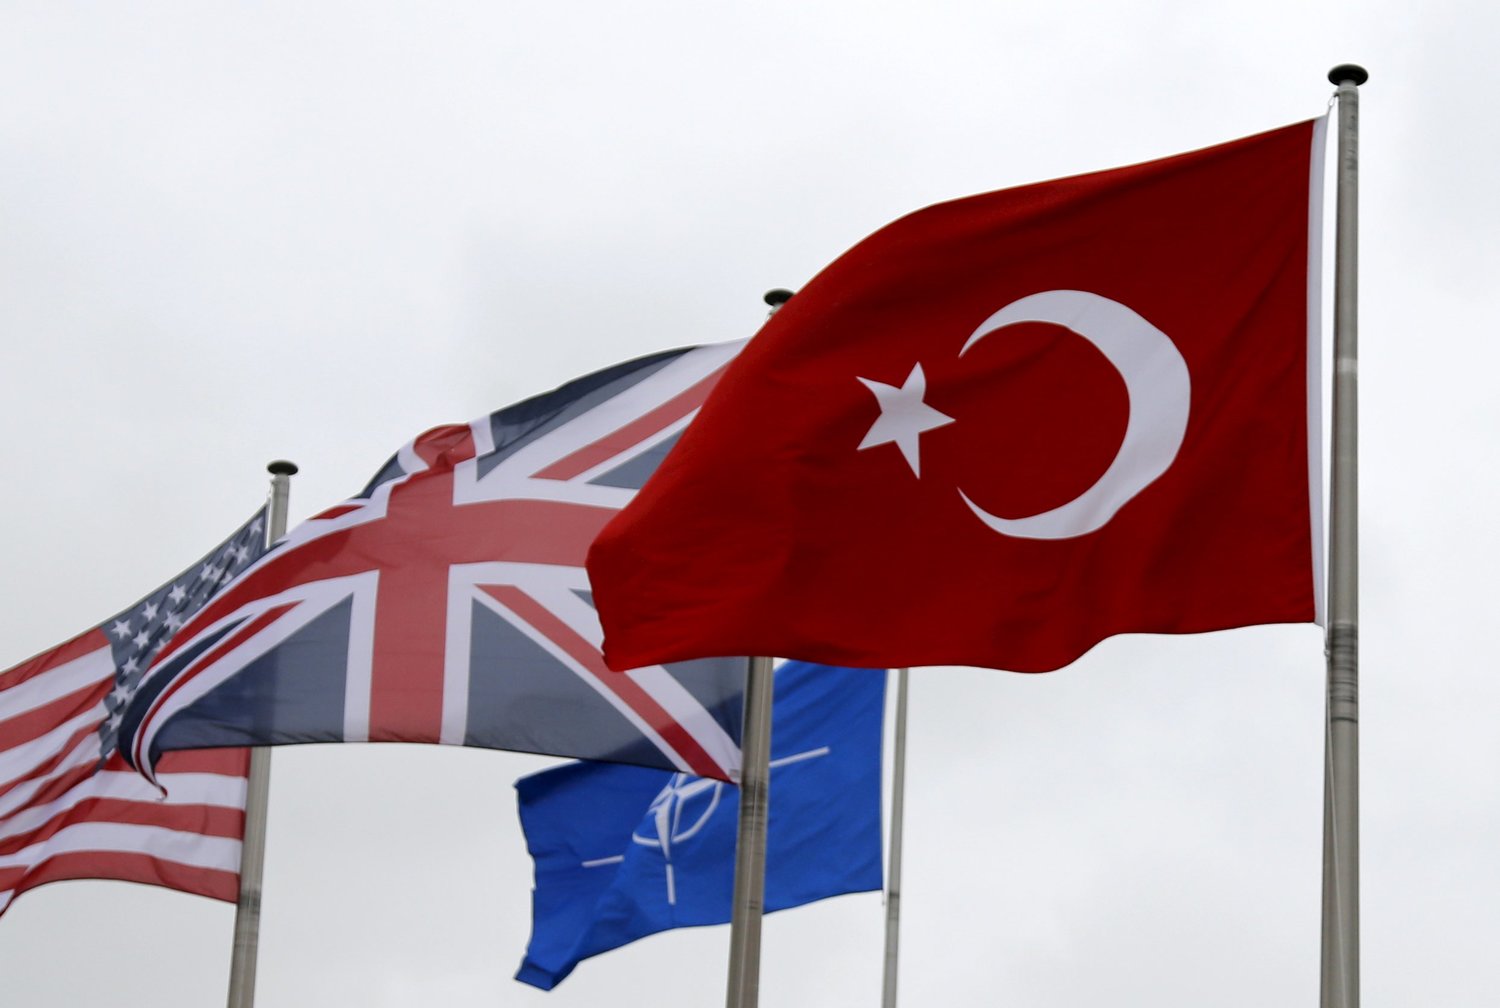 A Turkish flag flies among others flags of NATO members during the North Atlantic Council following Turkey's request for Article 4 consultations, at the Alliance headquarters in Brussels, Belgium, July 28, 2015. (FRANCOIS LENOIR/REUTERS)